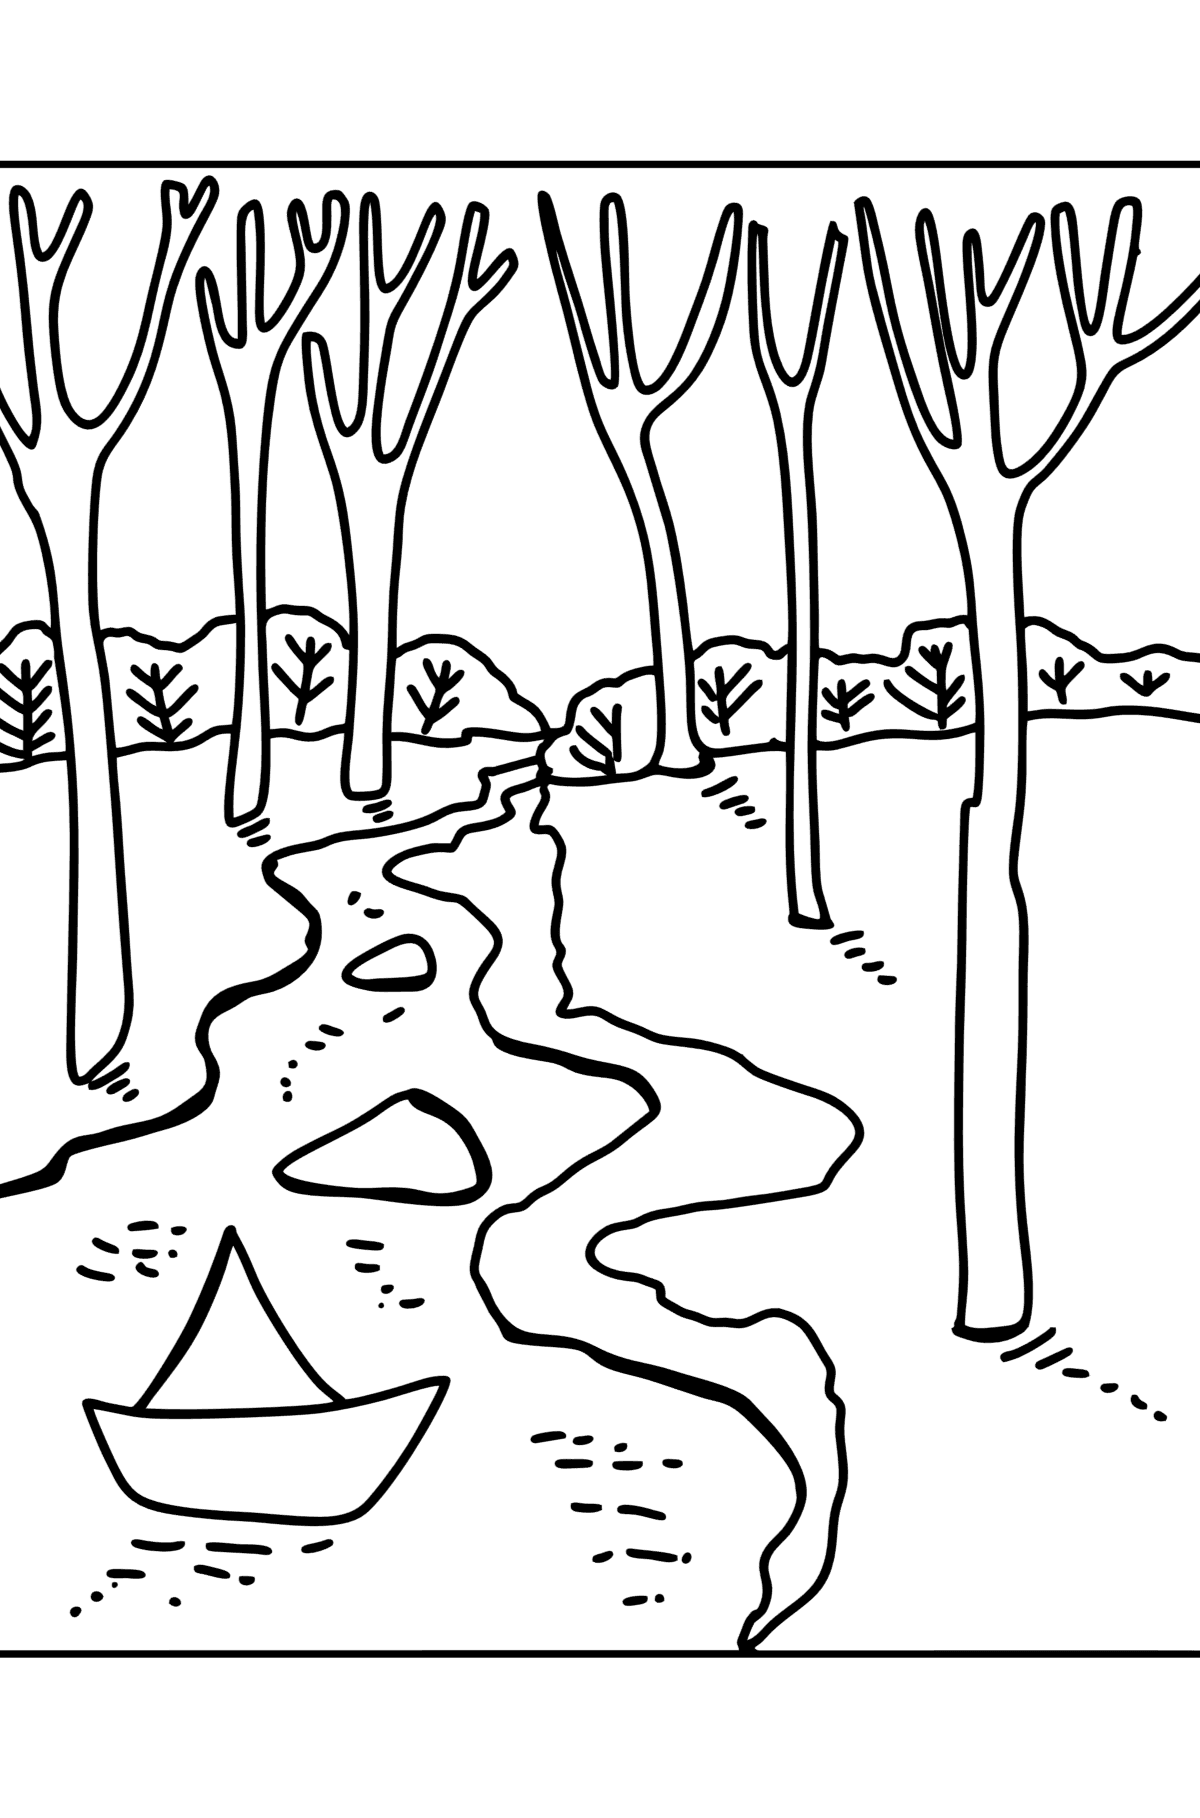 Spring Paper Boat and Stream coloring page - Coloring Pages for Kids